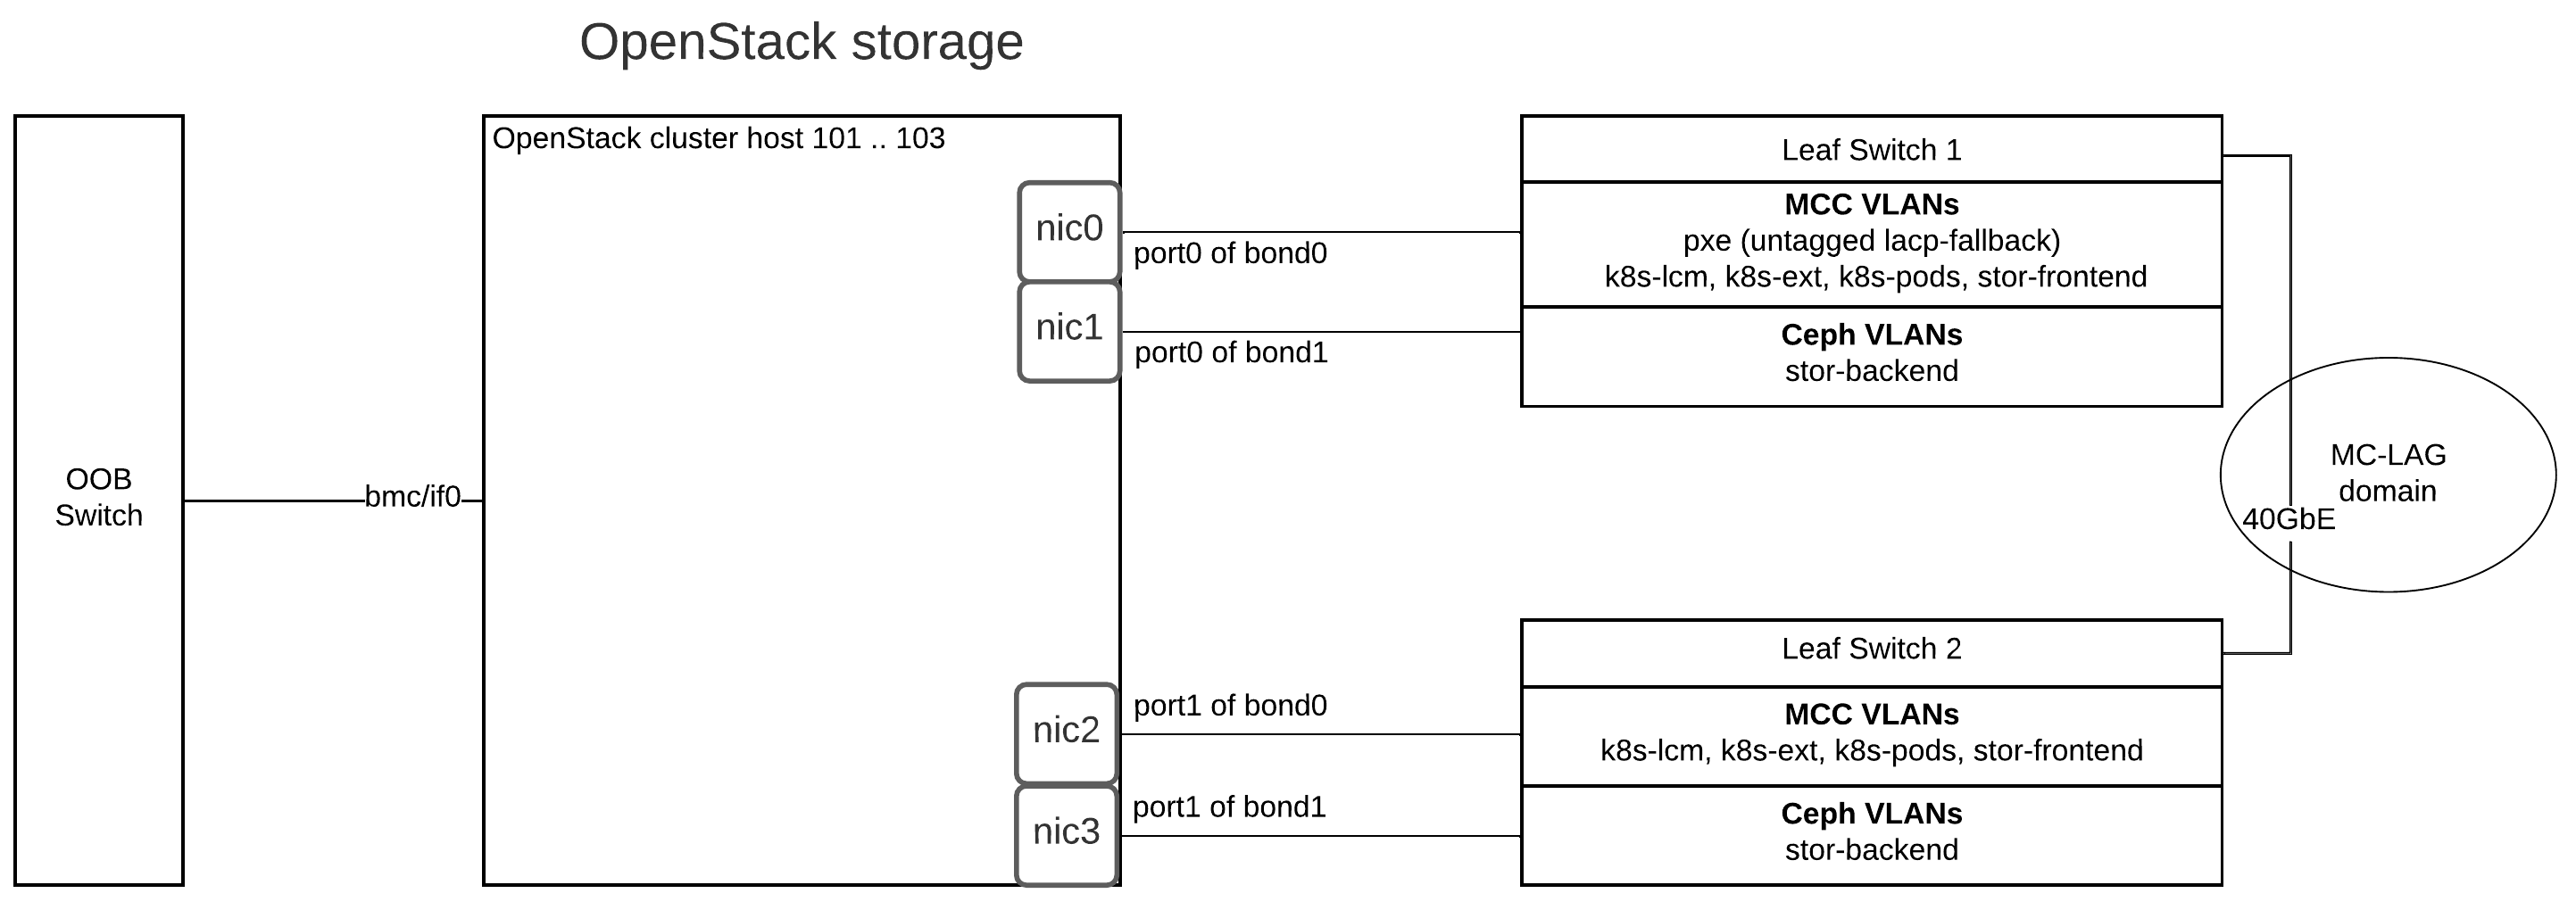 _images/os-cluster-storage-physical.png